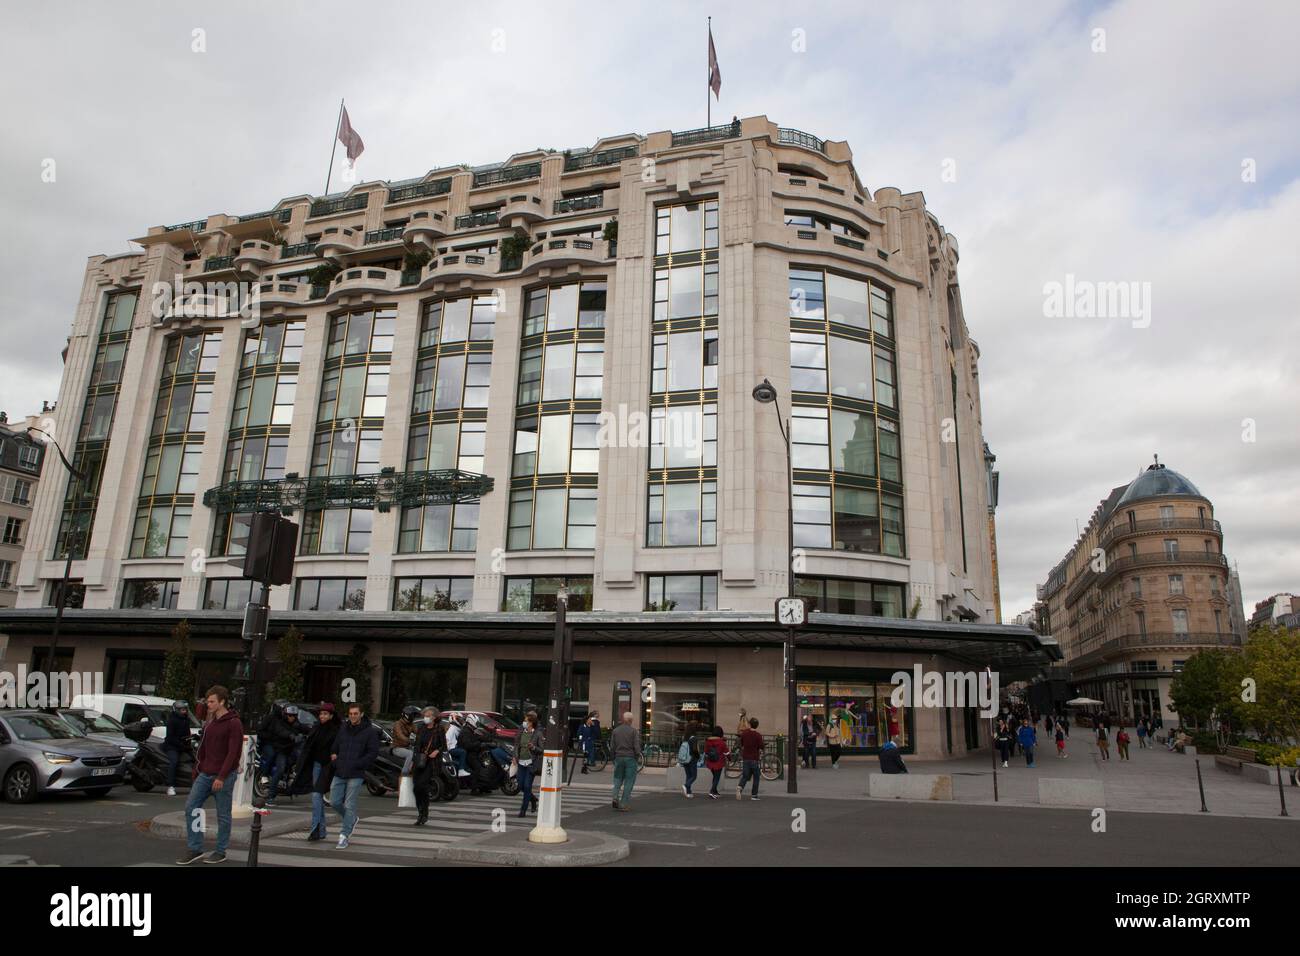 Paris, France, 1 October 2021: The Samaritaine department store has reopened after a long refurbishment which has preserved many of it's art deco and art nouveau features. The building now includes a hotel, the Cheval Blanc, and several spaces for eating and drinking, most notably under the glass roof surrounded by murals of peacocks. On the ground floor the 'Boutique de Loulou' sells gift items while the rest of the store is devoted to luxury designer brands. Anna Watson/Alamy Live News Stock Photo